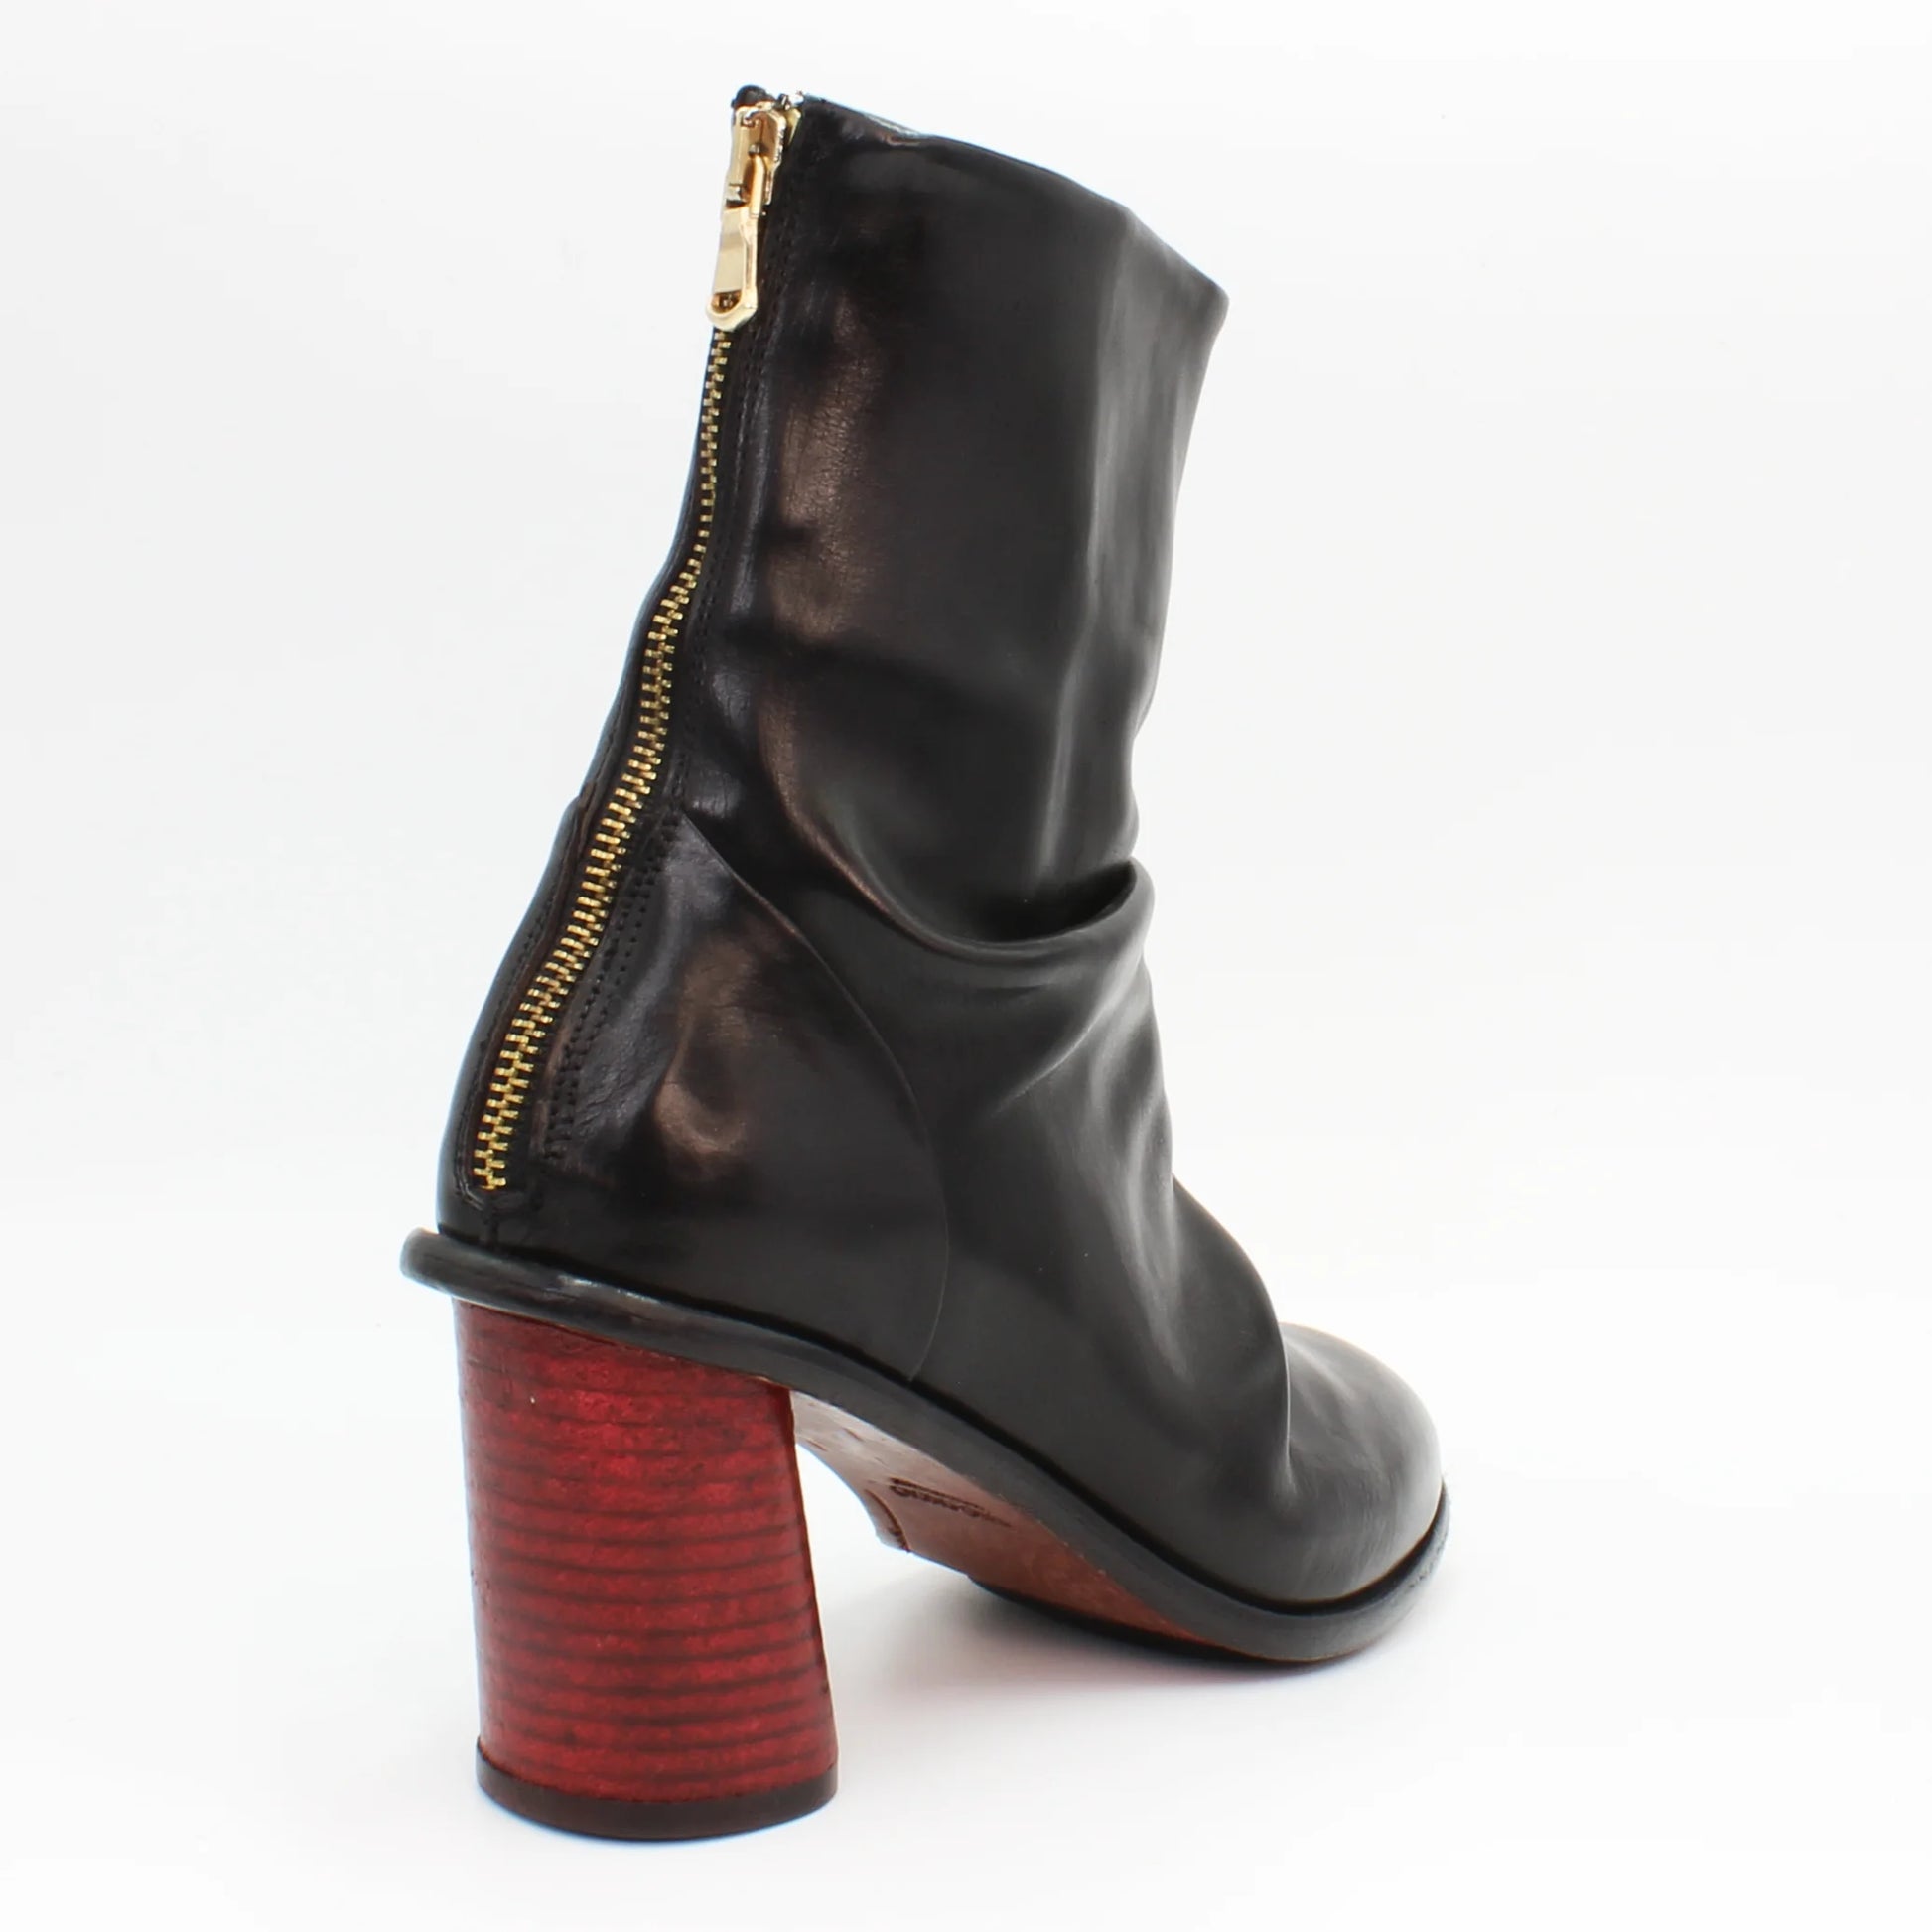 Ladies Italian made genuine leather ankle boot with 7.5cm heel in black made in Italy exclusively for Aliverti